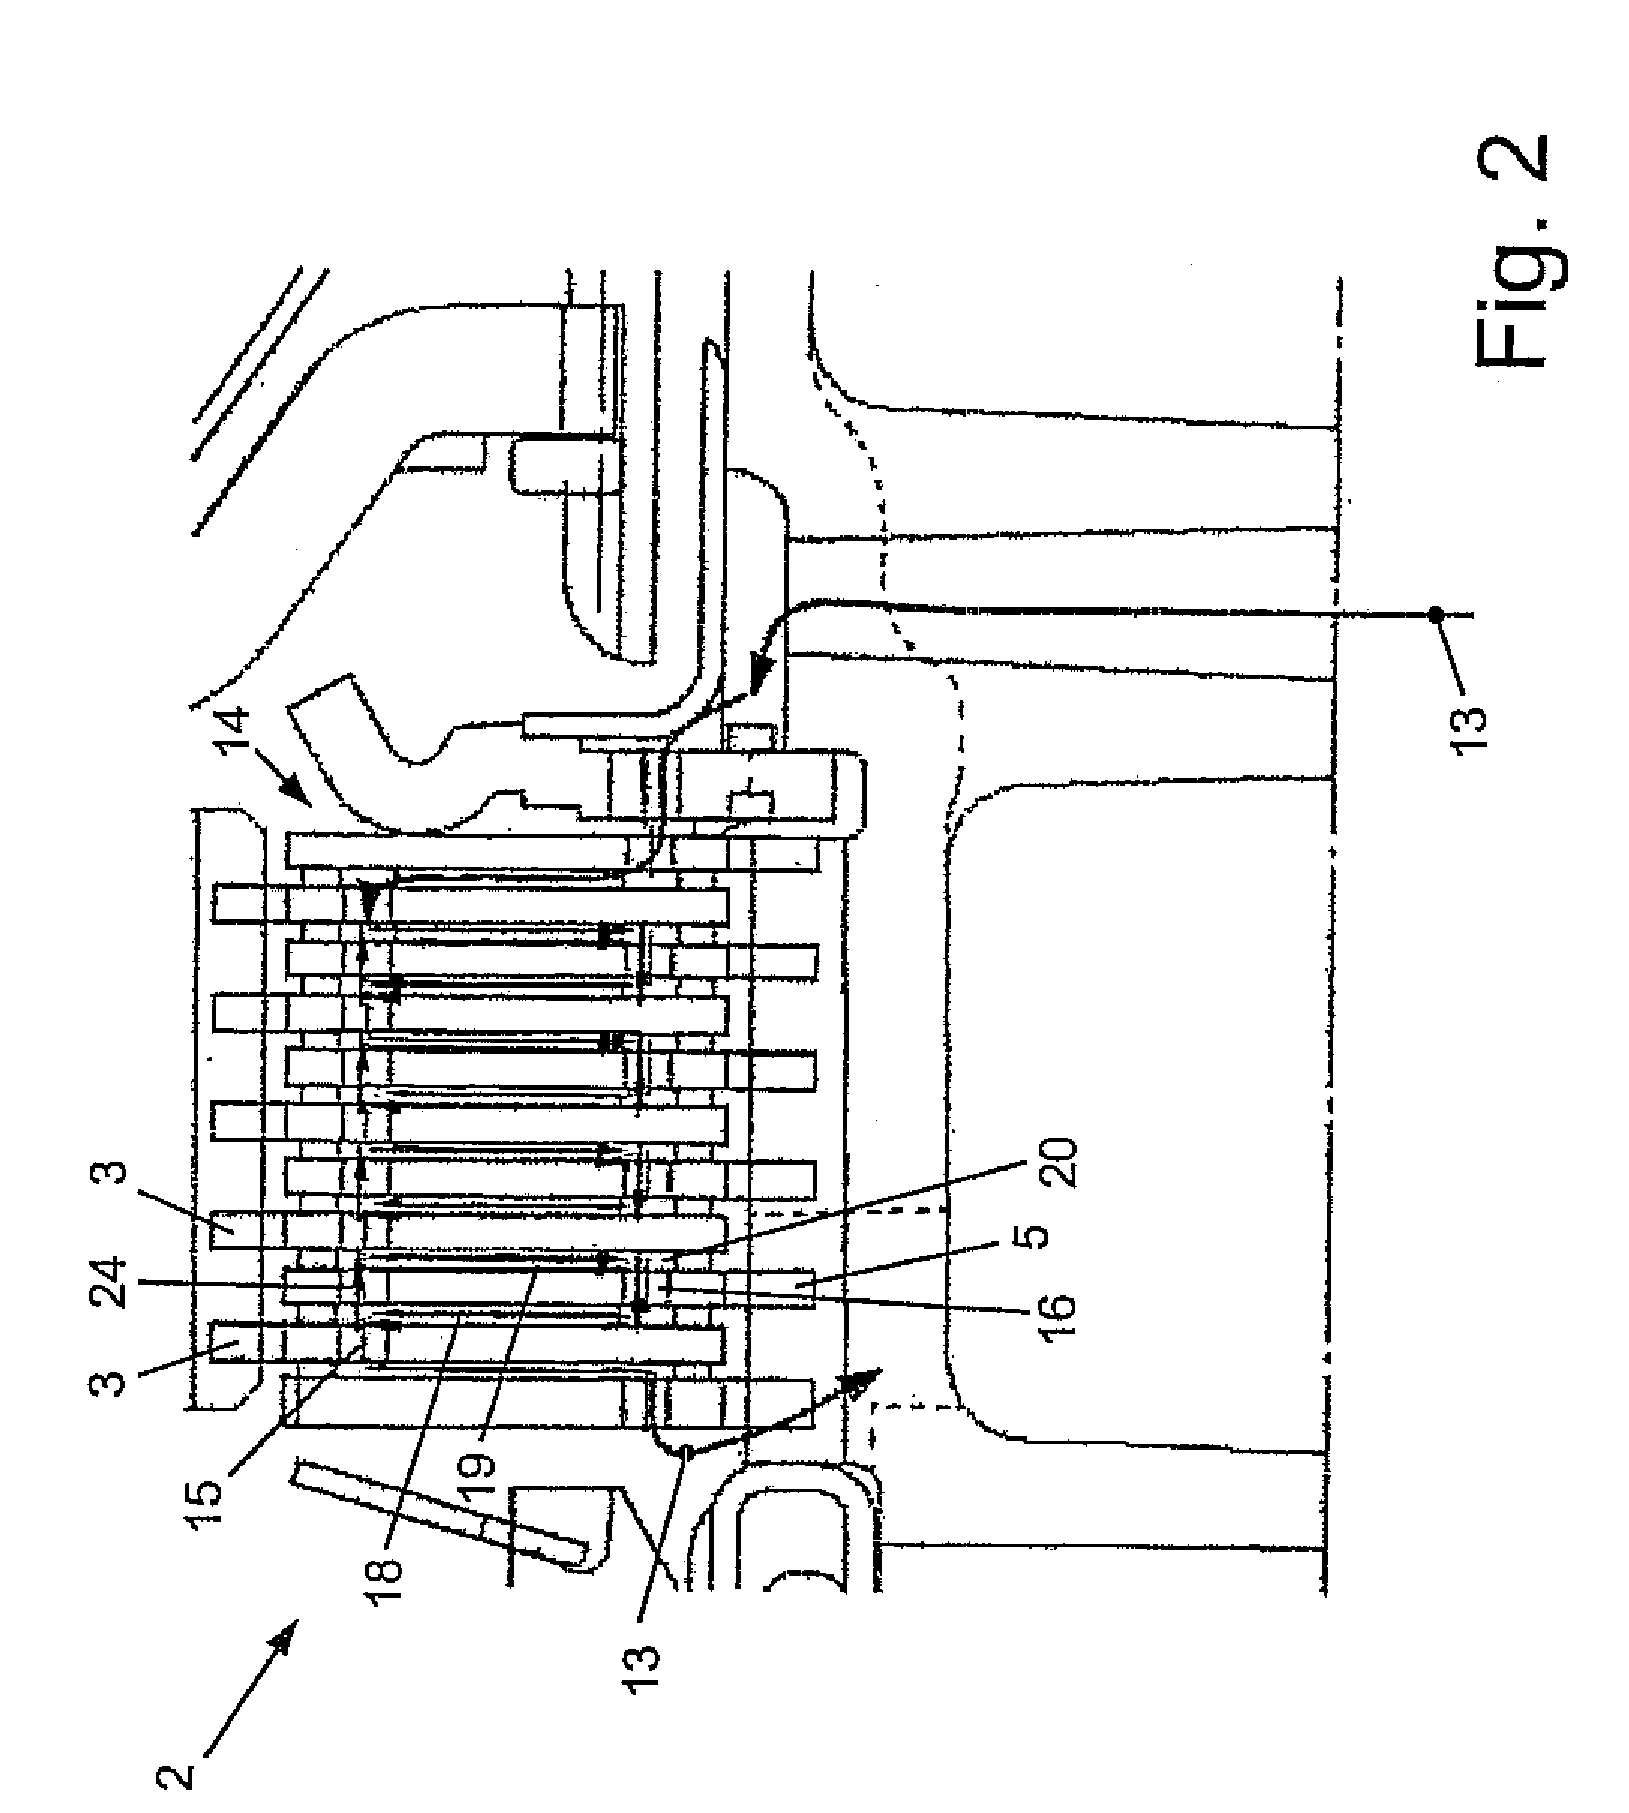 Multi-disk clutch or multi-disk brake with axial oil flow